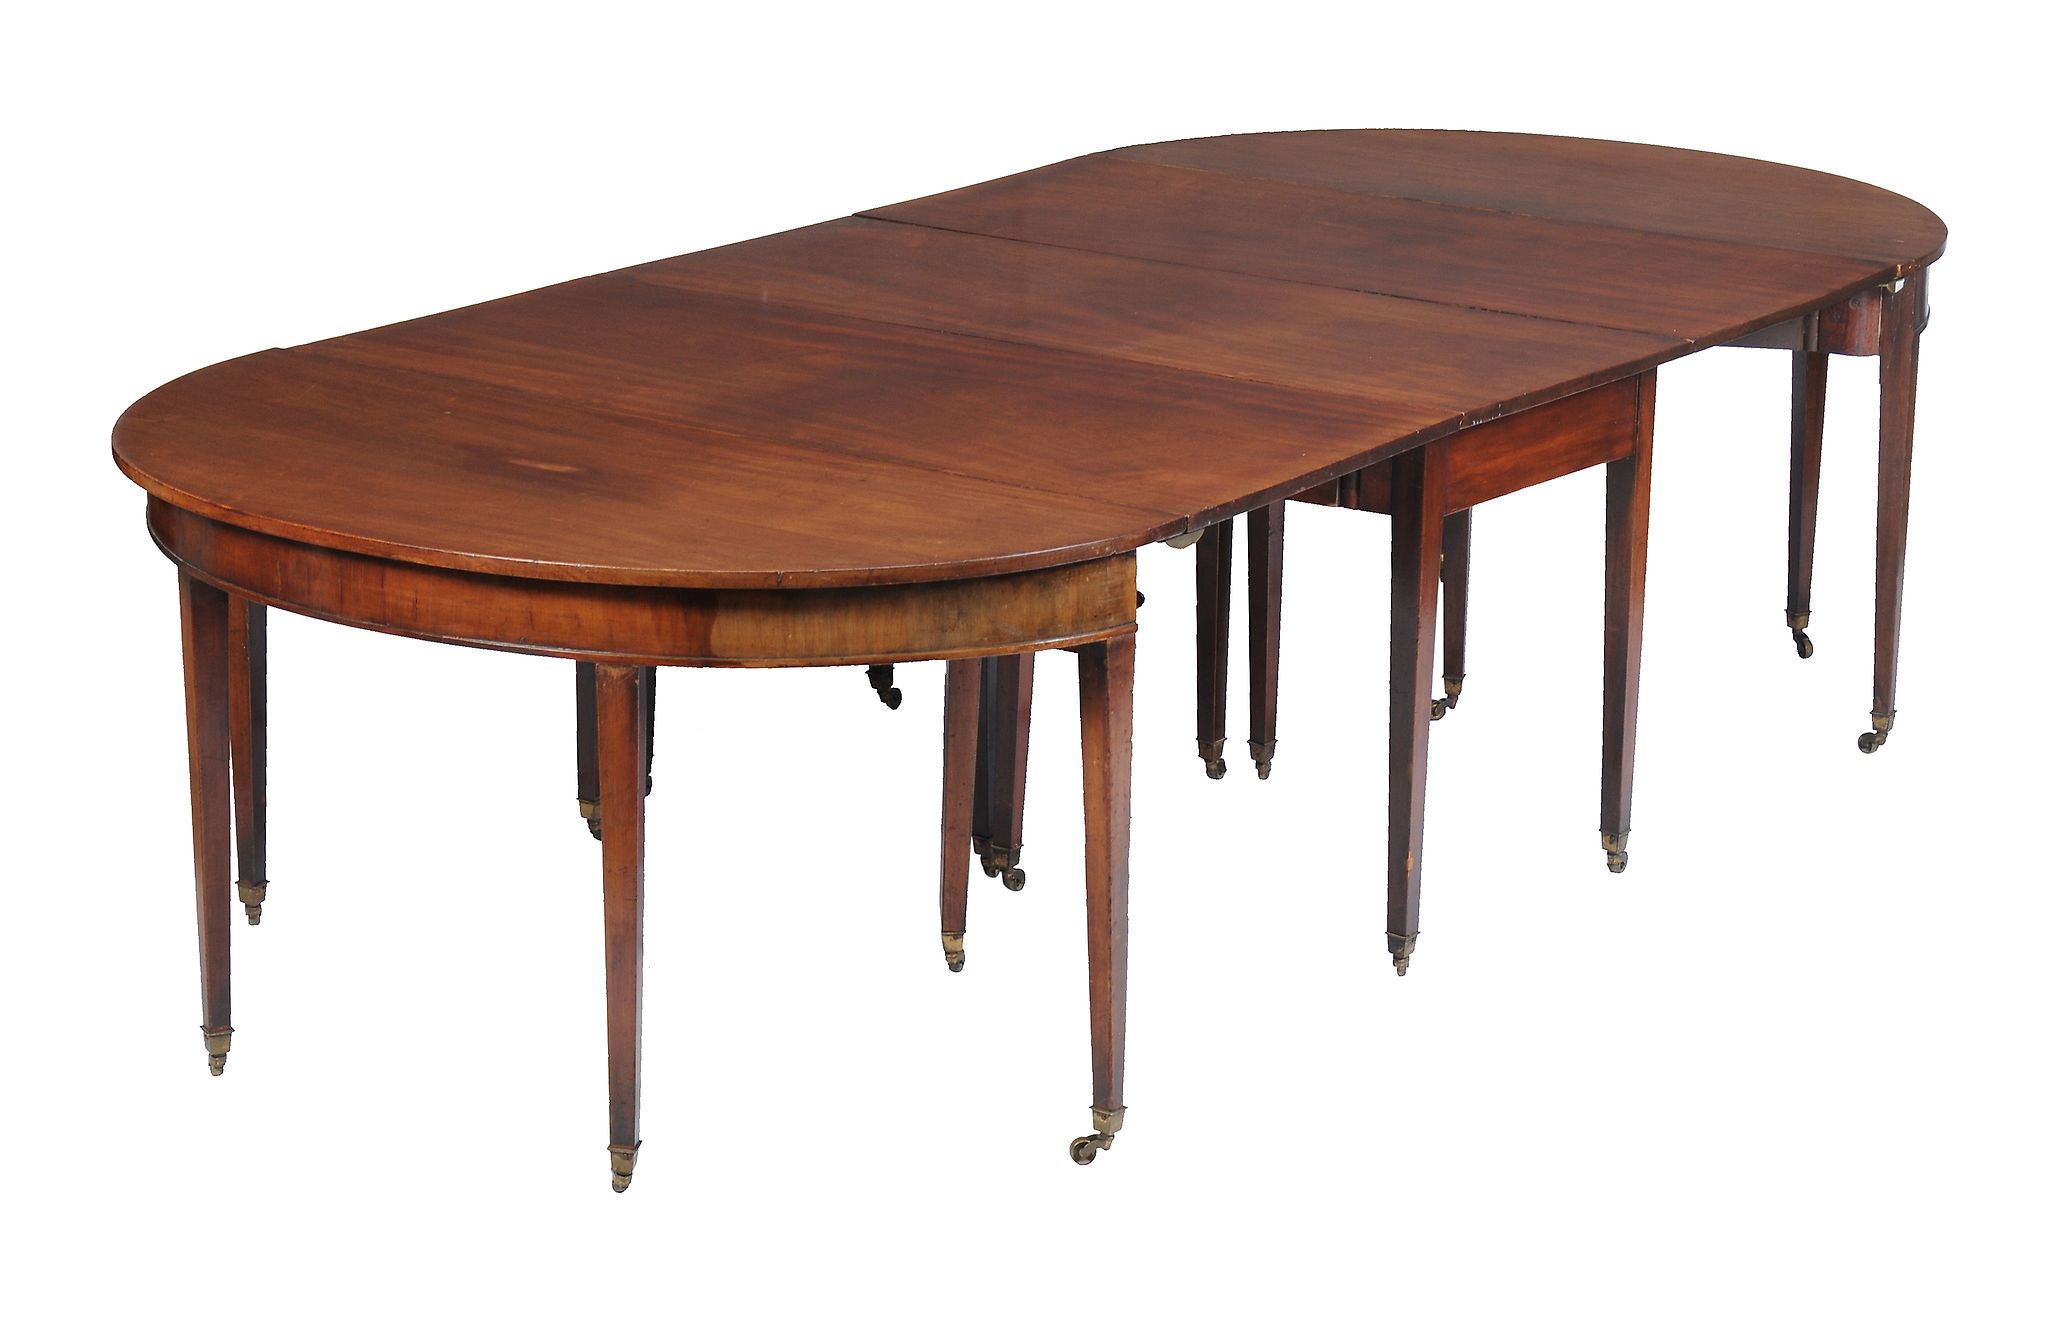 A George III mahogany dining table , early 19th century, with two additional leaves, 561cm long